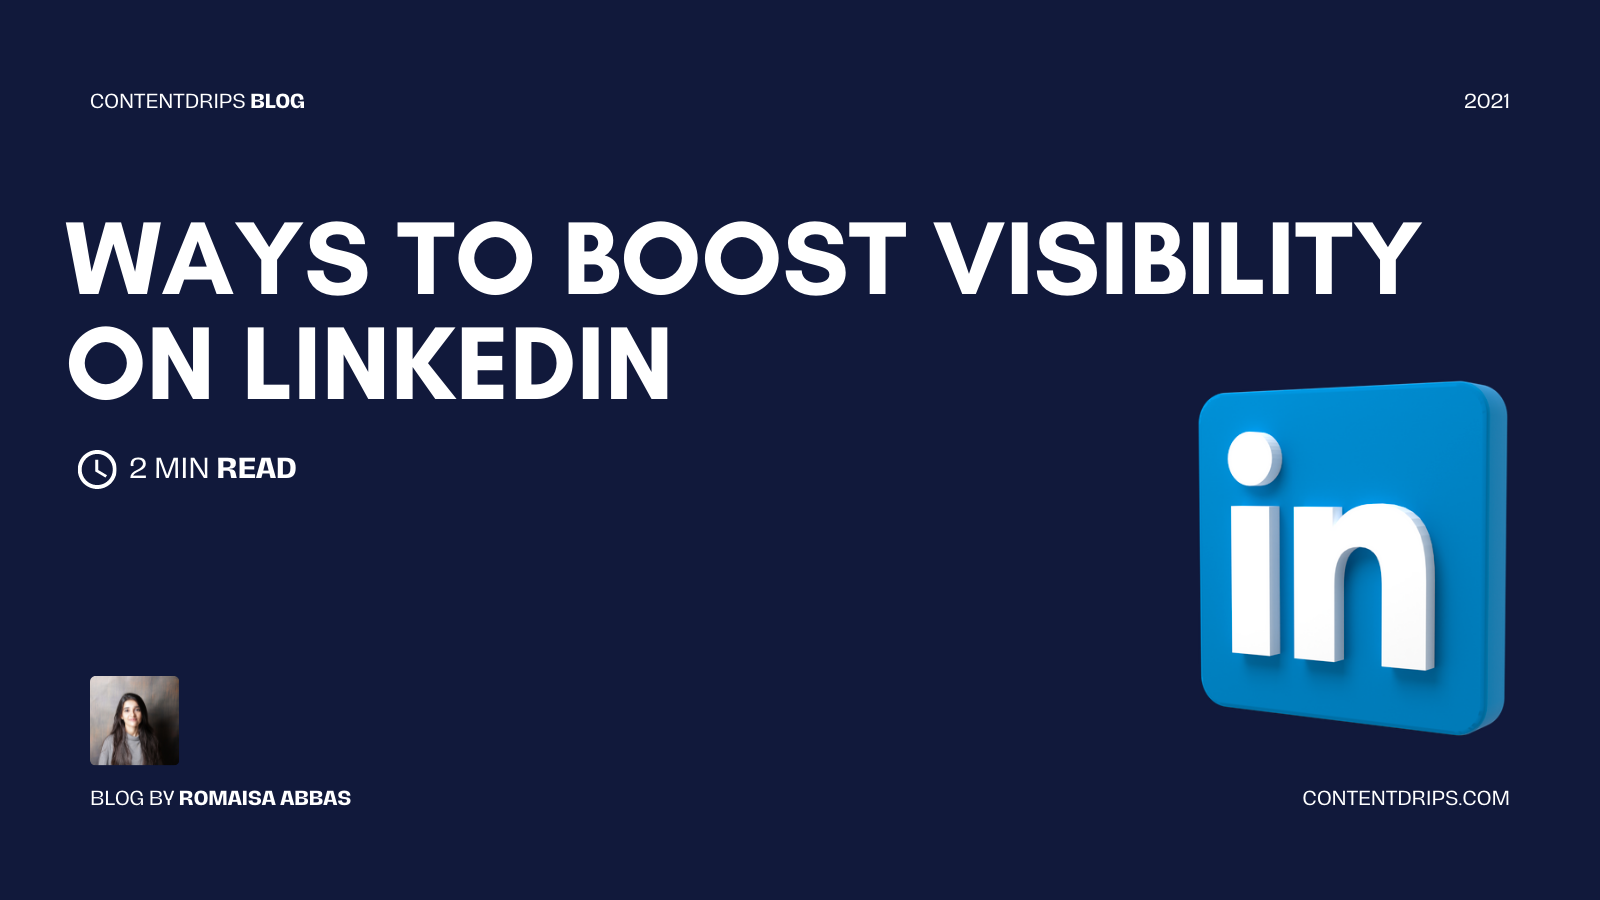 Ways to Boost Visibility on LinkedIn